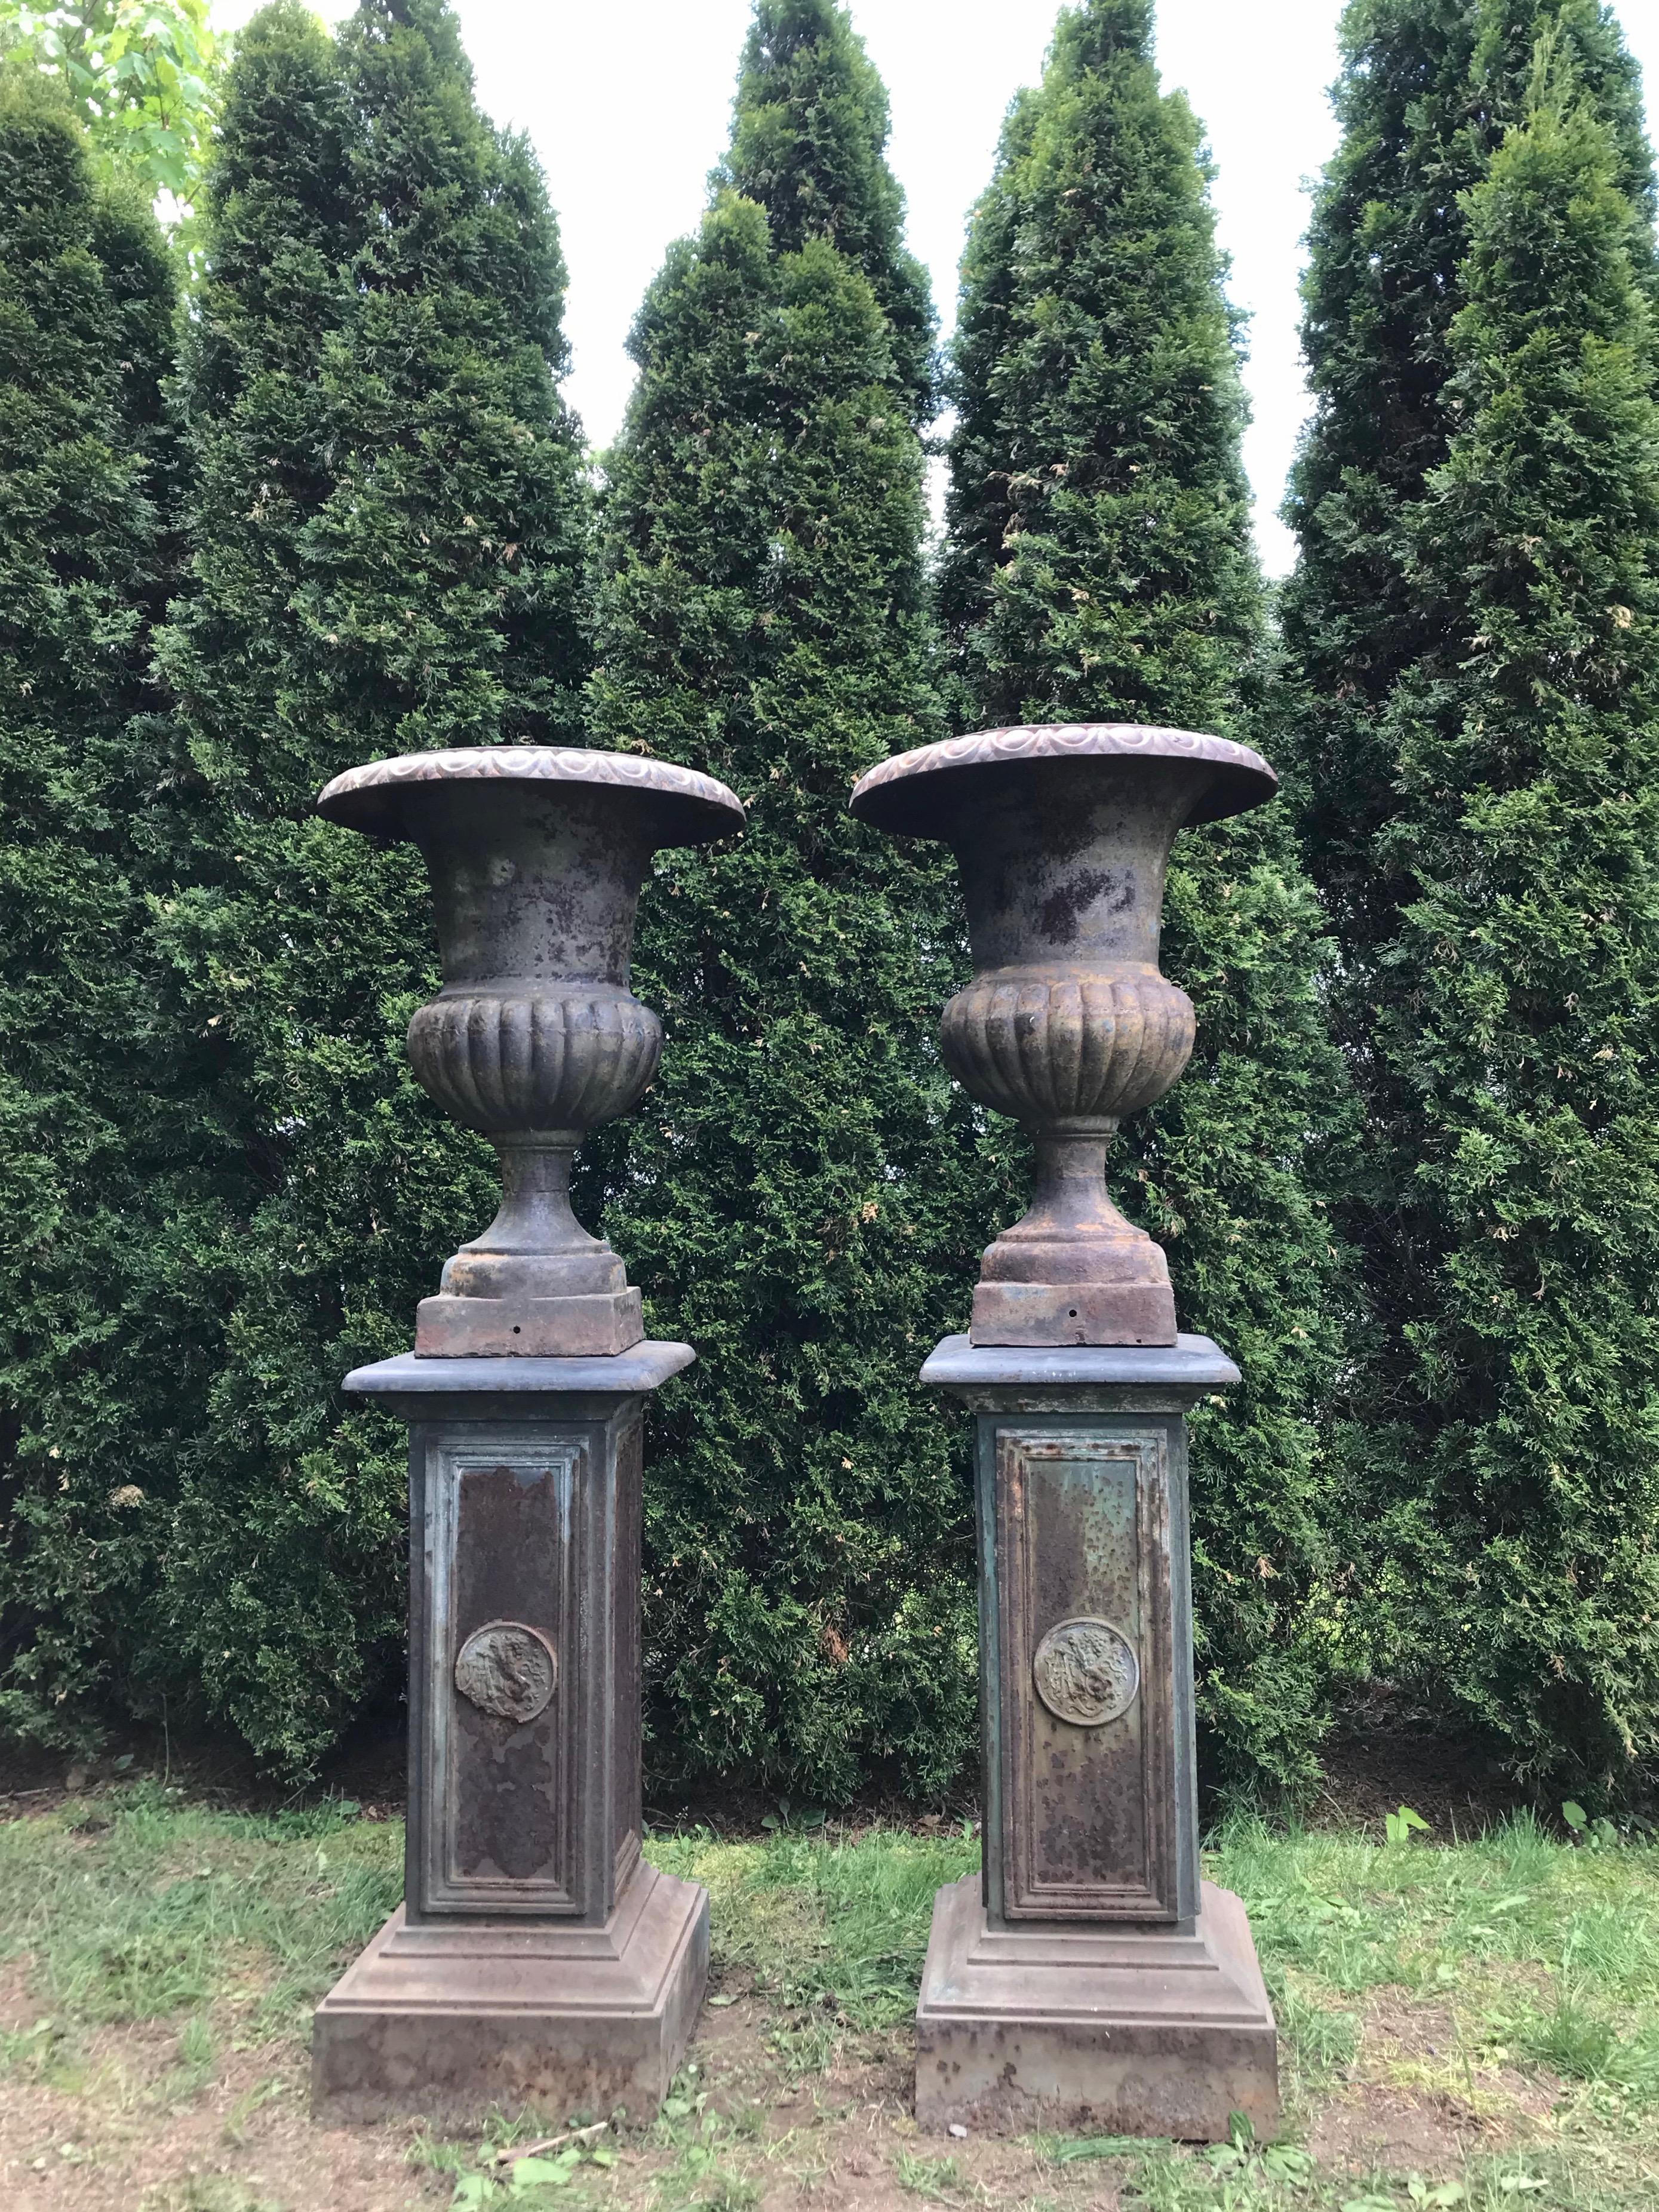 We found these urns and pedestals in different parts of France, and have made, what we think is, a very successful marriage of them. The urns, which are made of cast iron, with everted lobed rims and quarter-lobed bodies, are in excellent antique